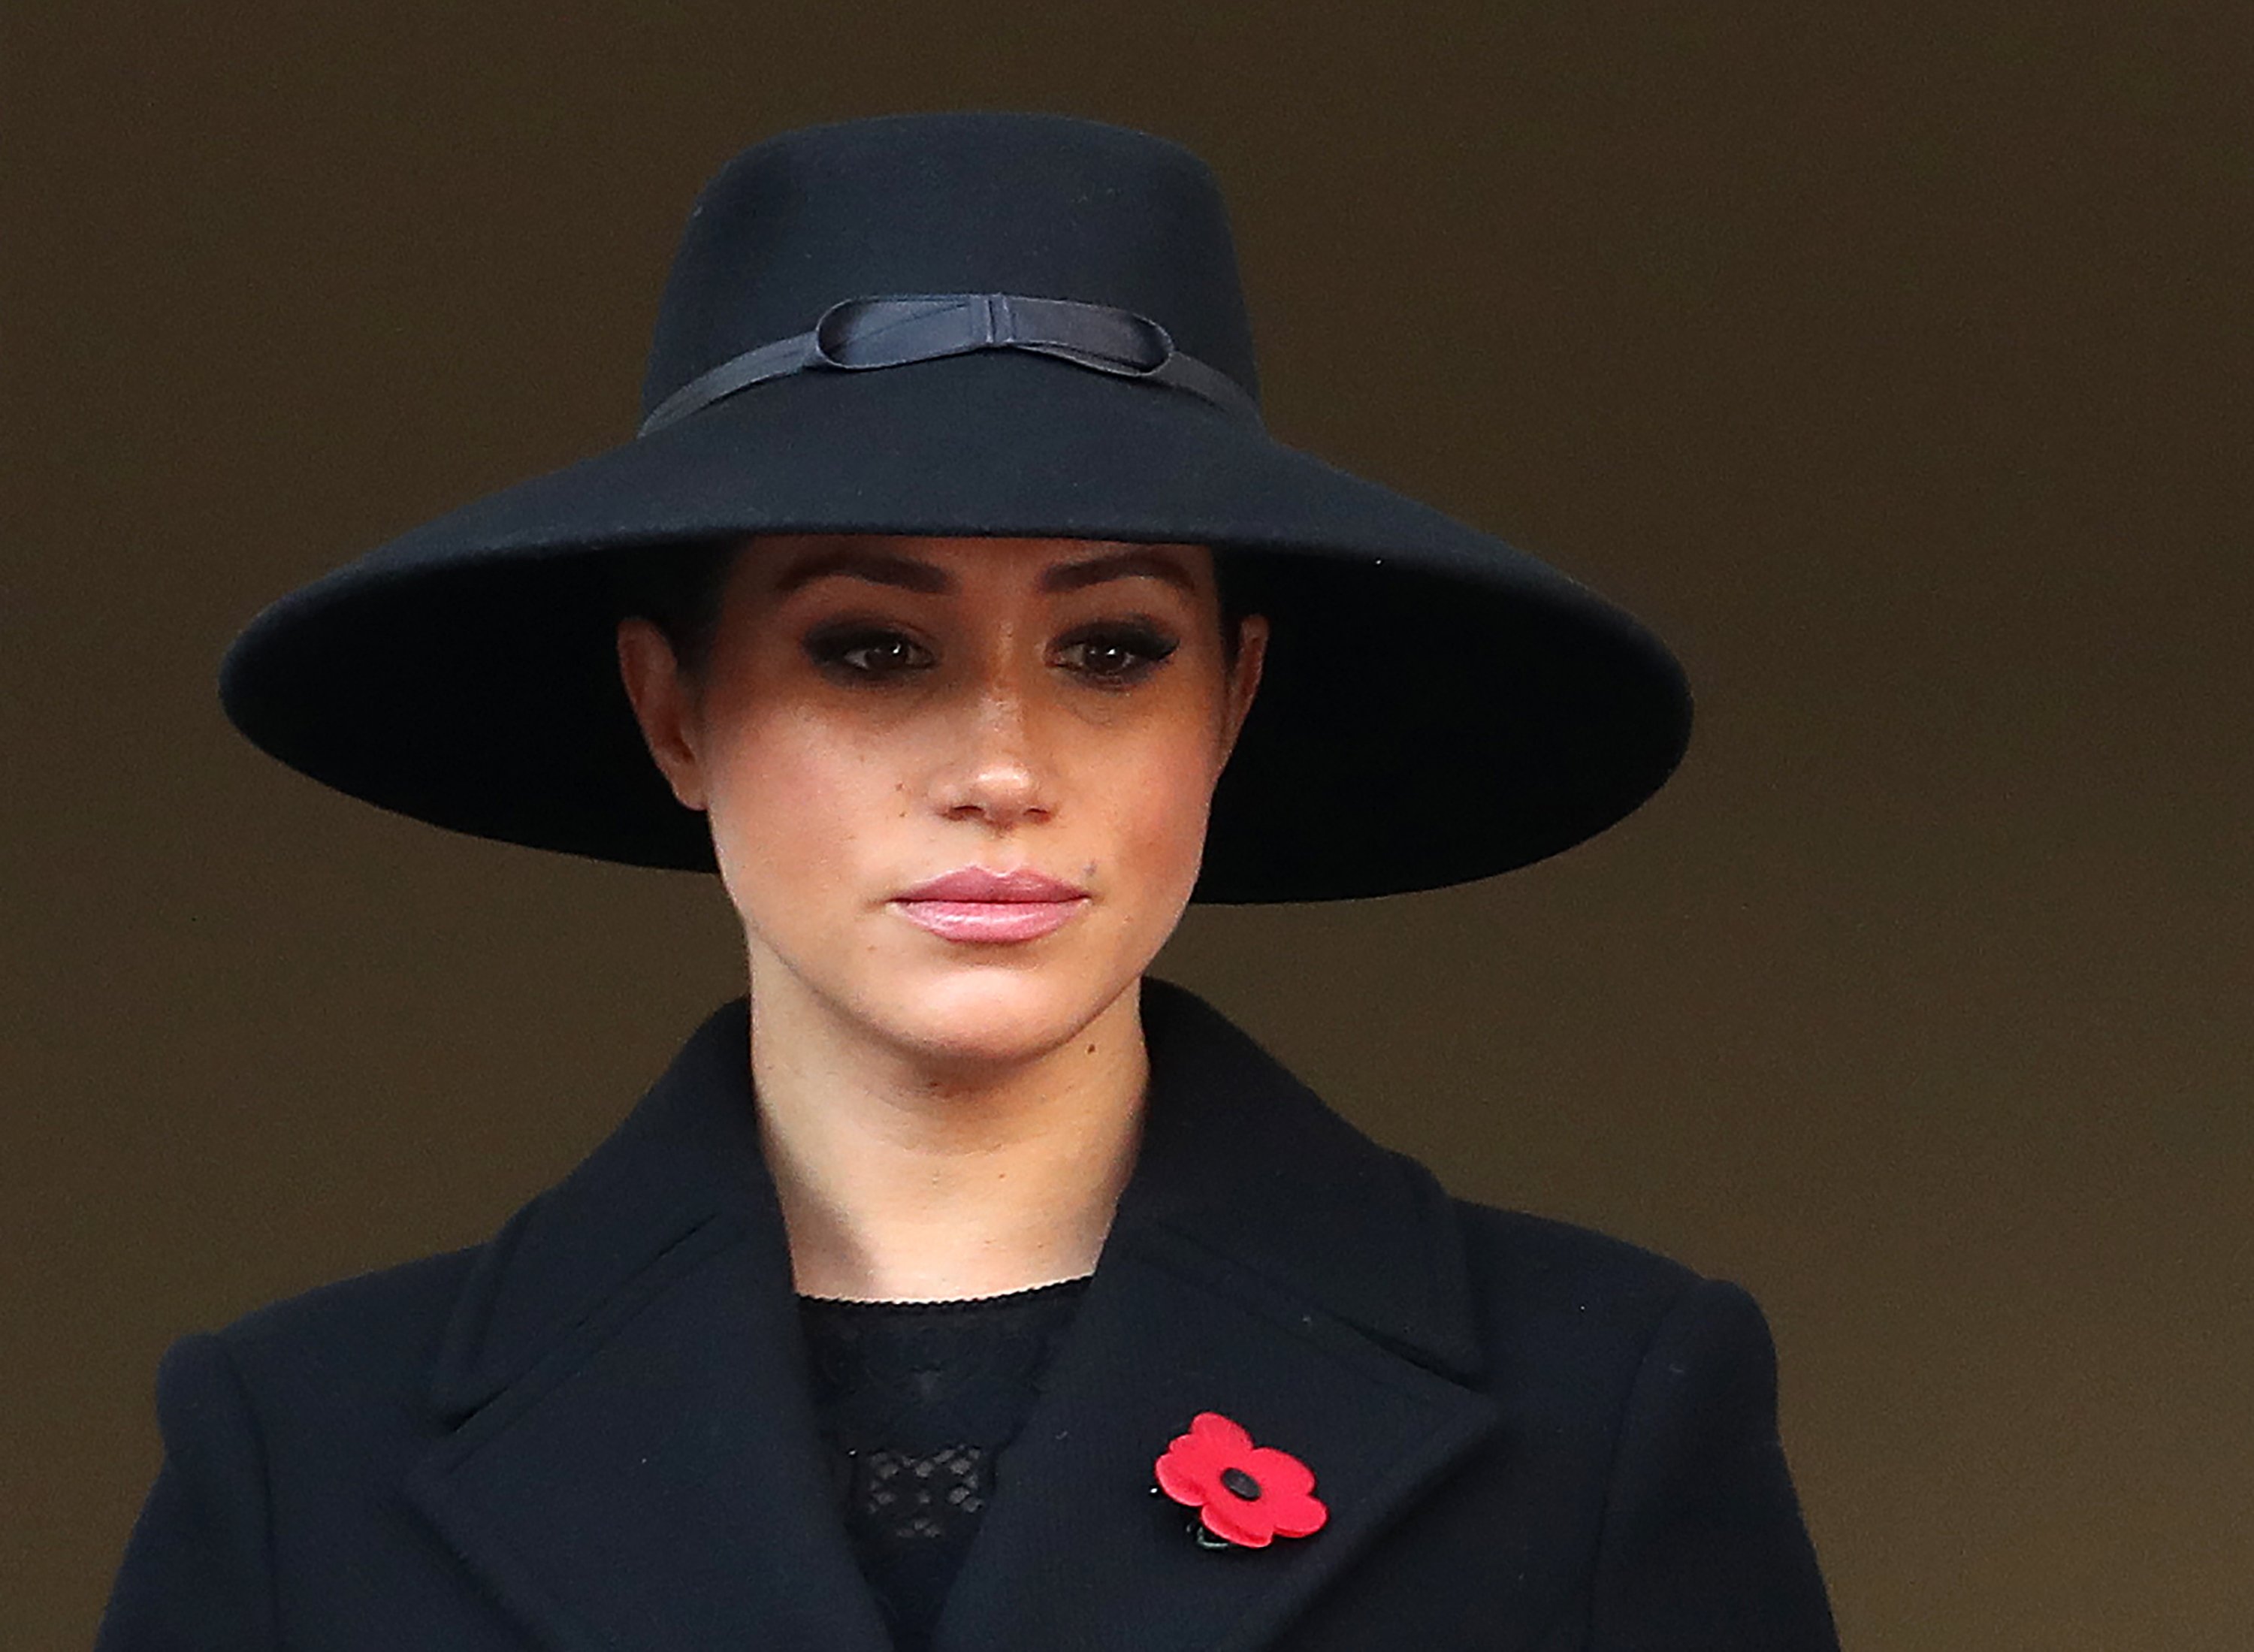 Duchess Meghan at the annual Remembrance Sunday memorial on November 10, 2019, in London, England | Photo: Getty Images